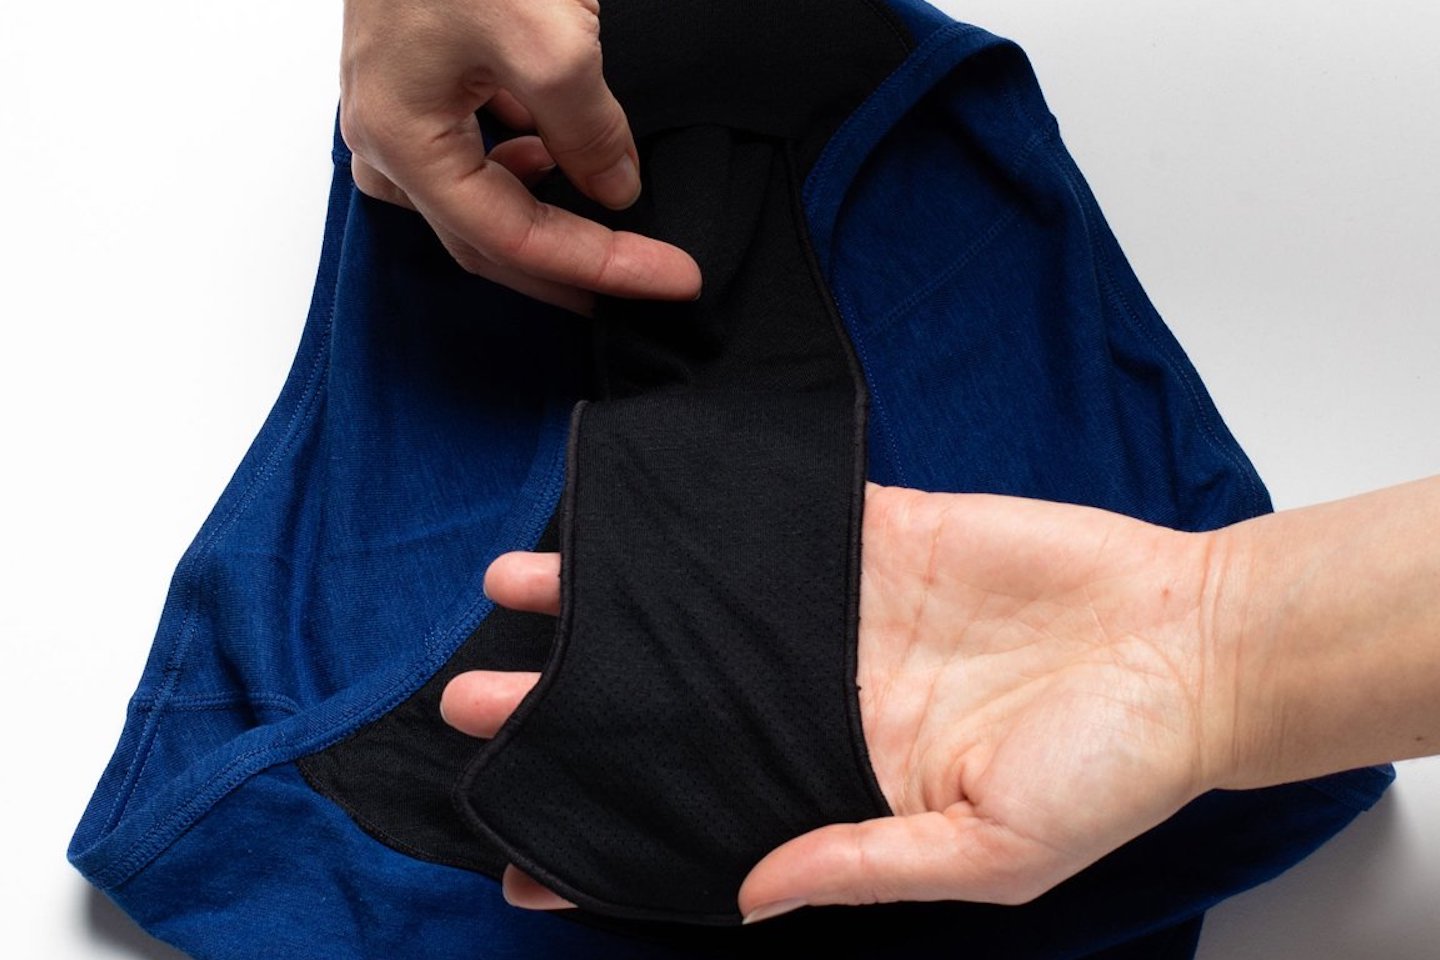 Two hands are seen inserting a black piece of fabric (named the Booster) into the gusset of a pair of period underwear. The underwear is blue.